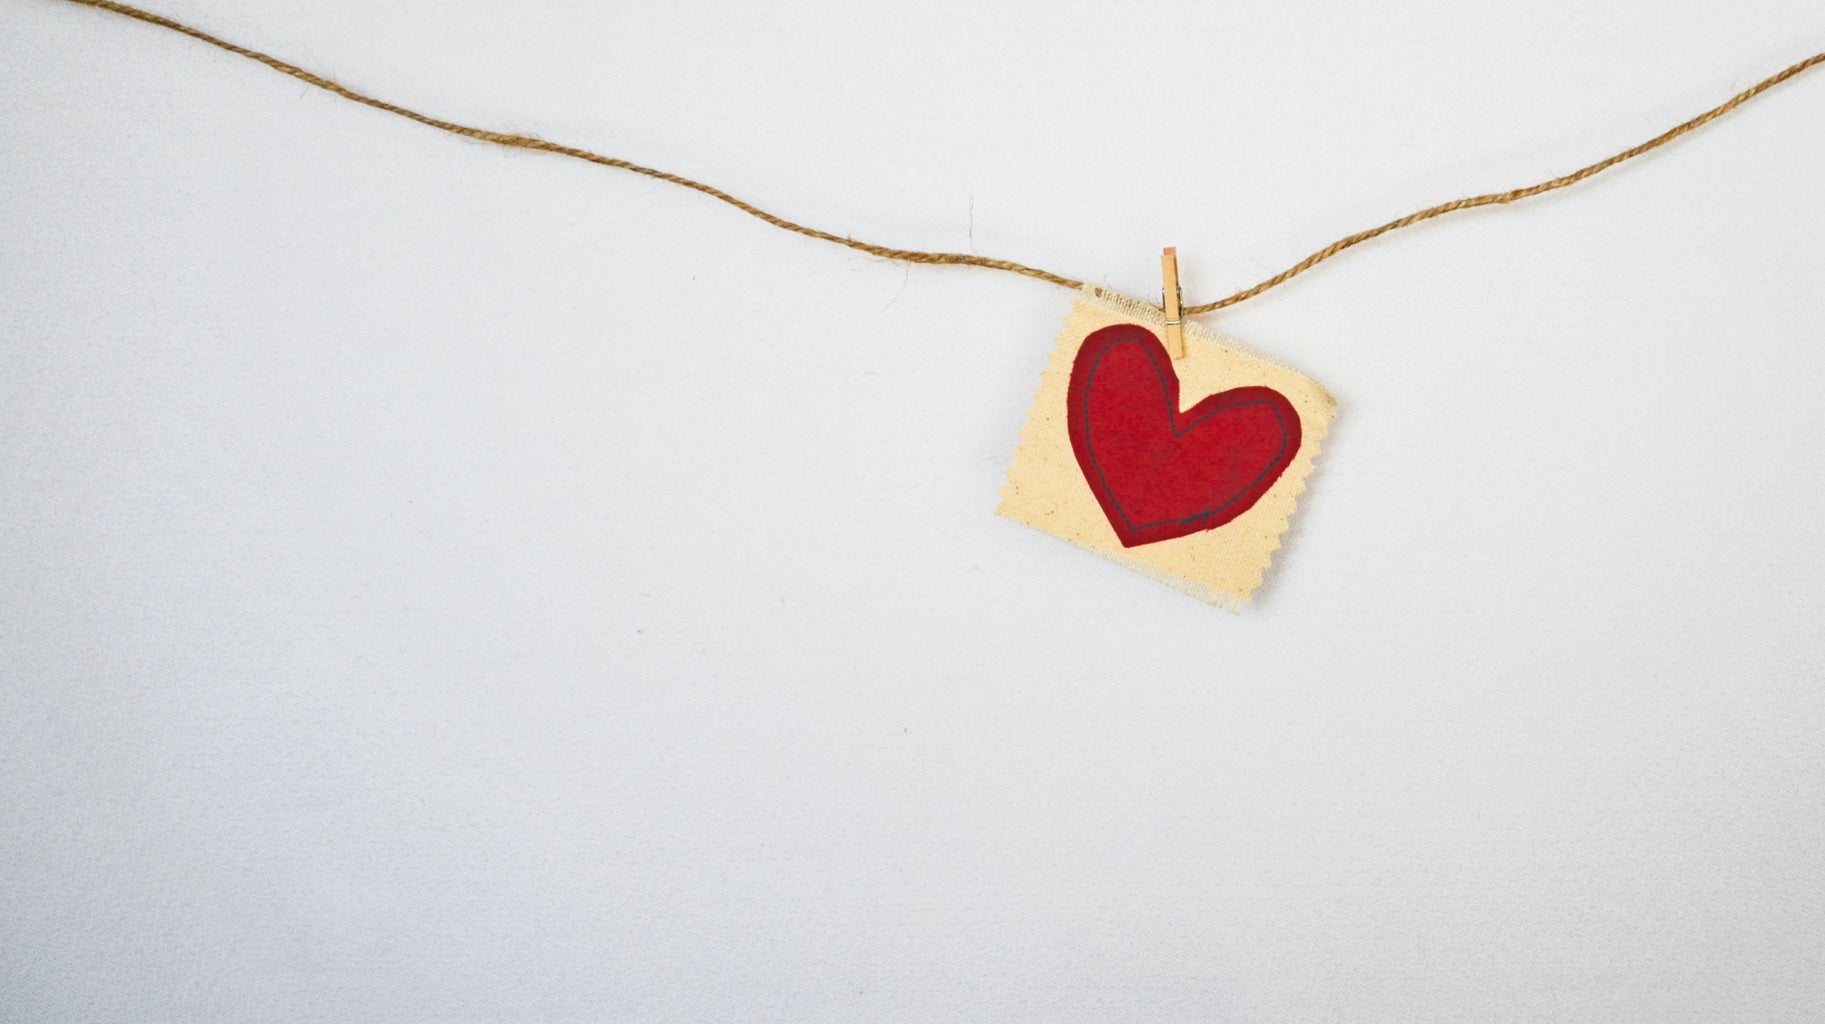 a little read heart attached with a clothespin to a horizontal piece of string against a gray wall